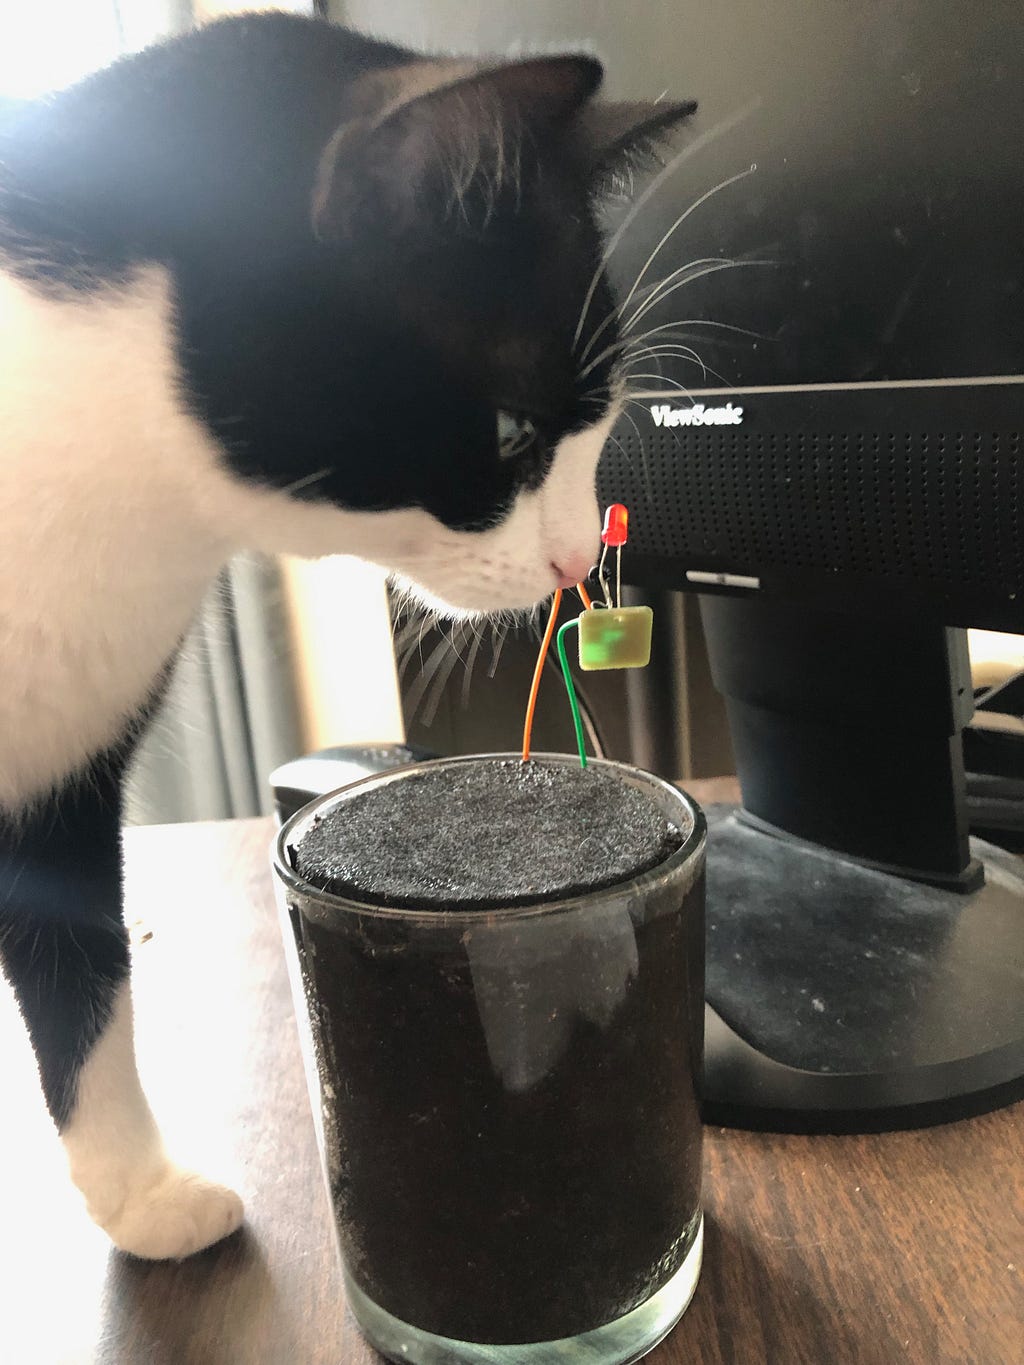 My cat trying to eat the wires on the Mudwatt